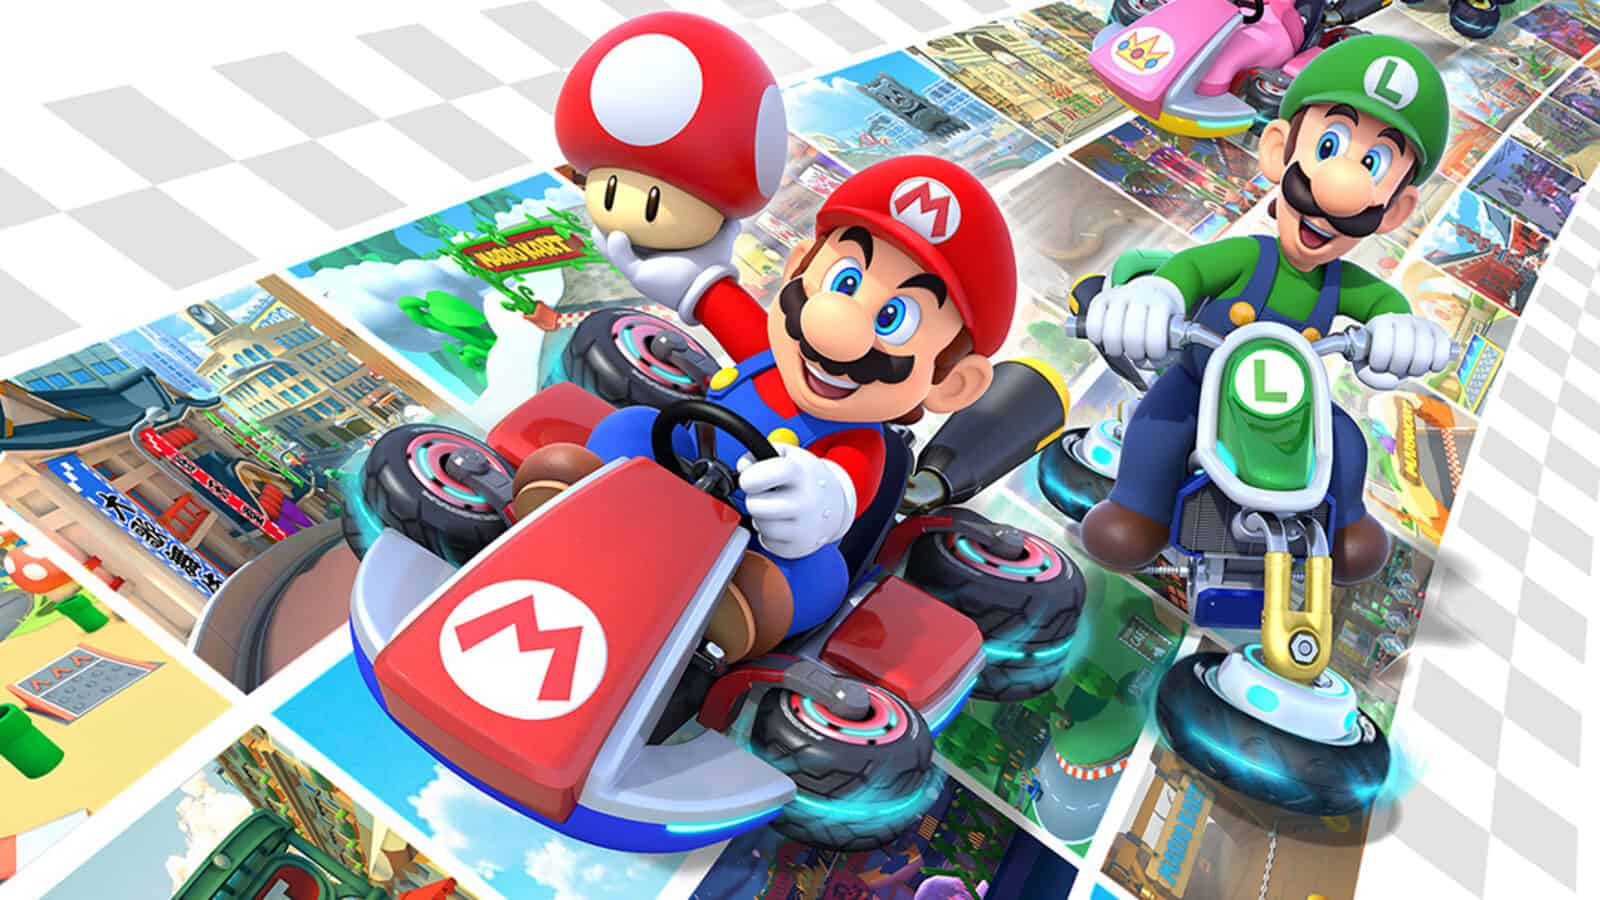 *LATEST* Mario Kart 8 wave 2 DLC release date finally REVEALED